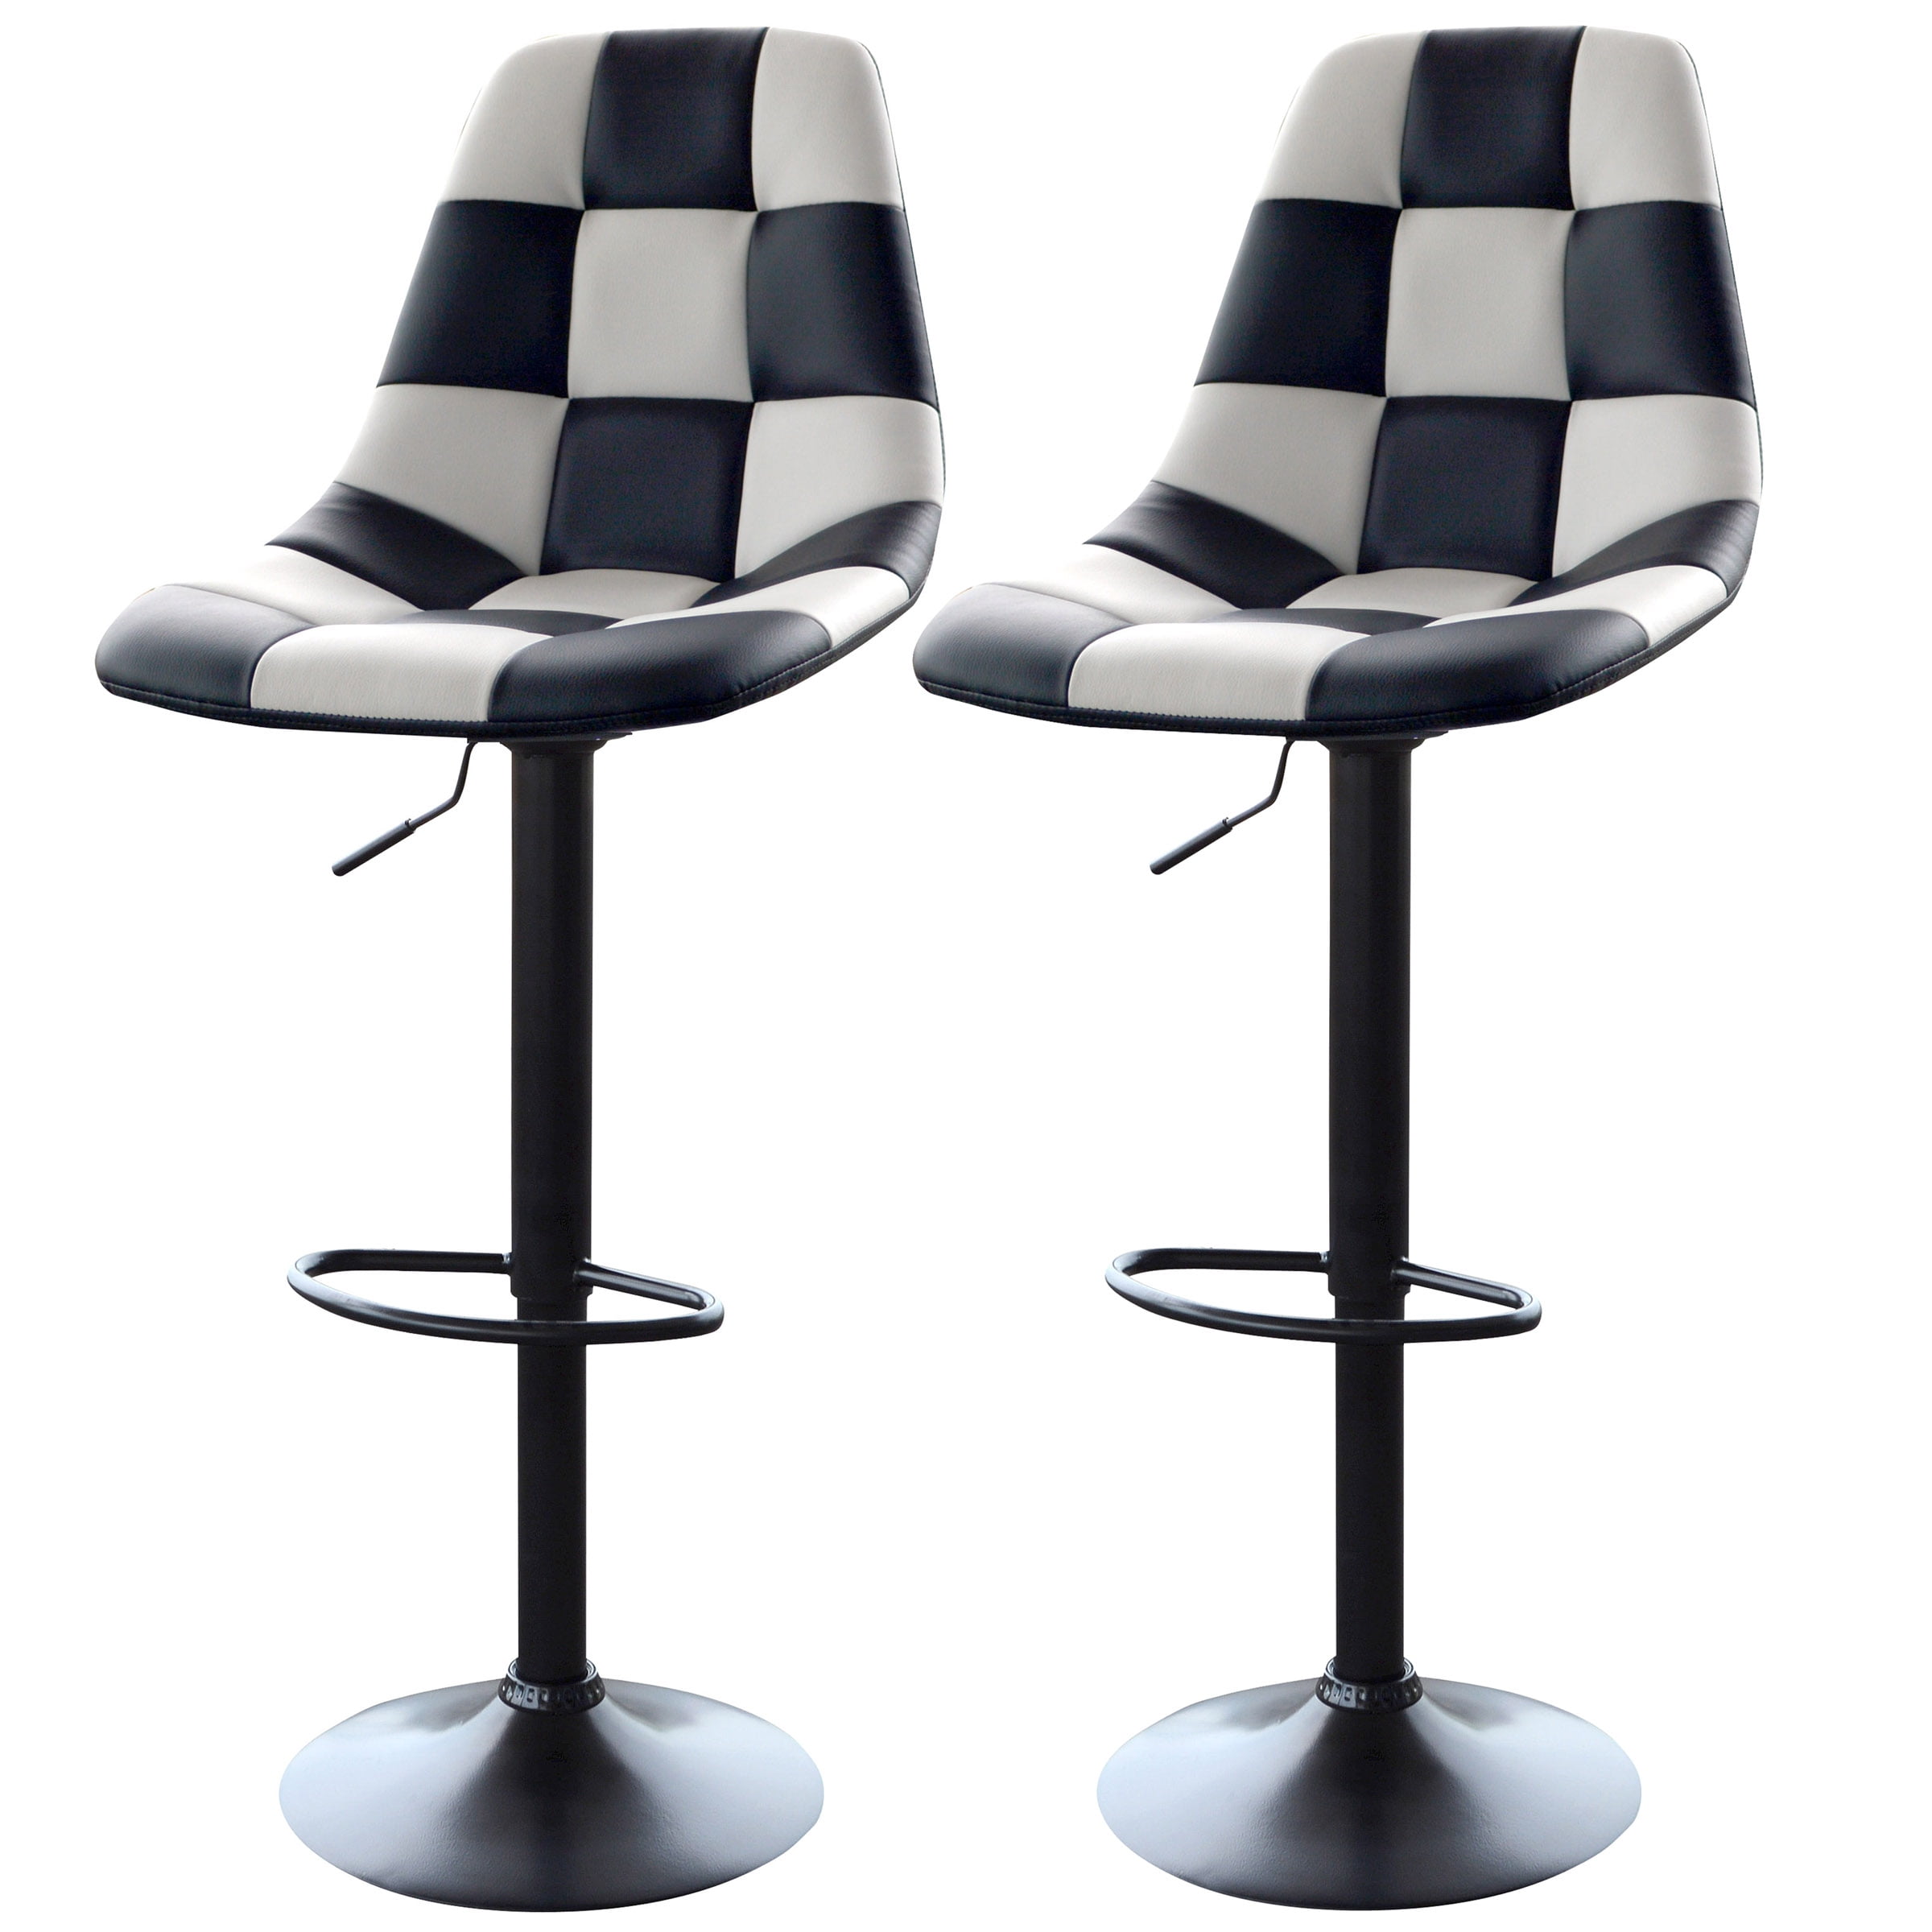 AmeriHome 2-Piece Racing Bar Chair Set, White And Black Patterned